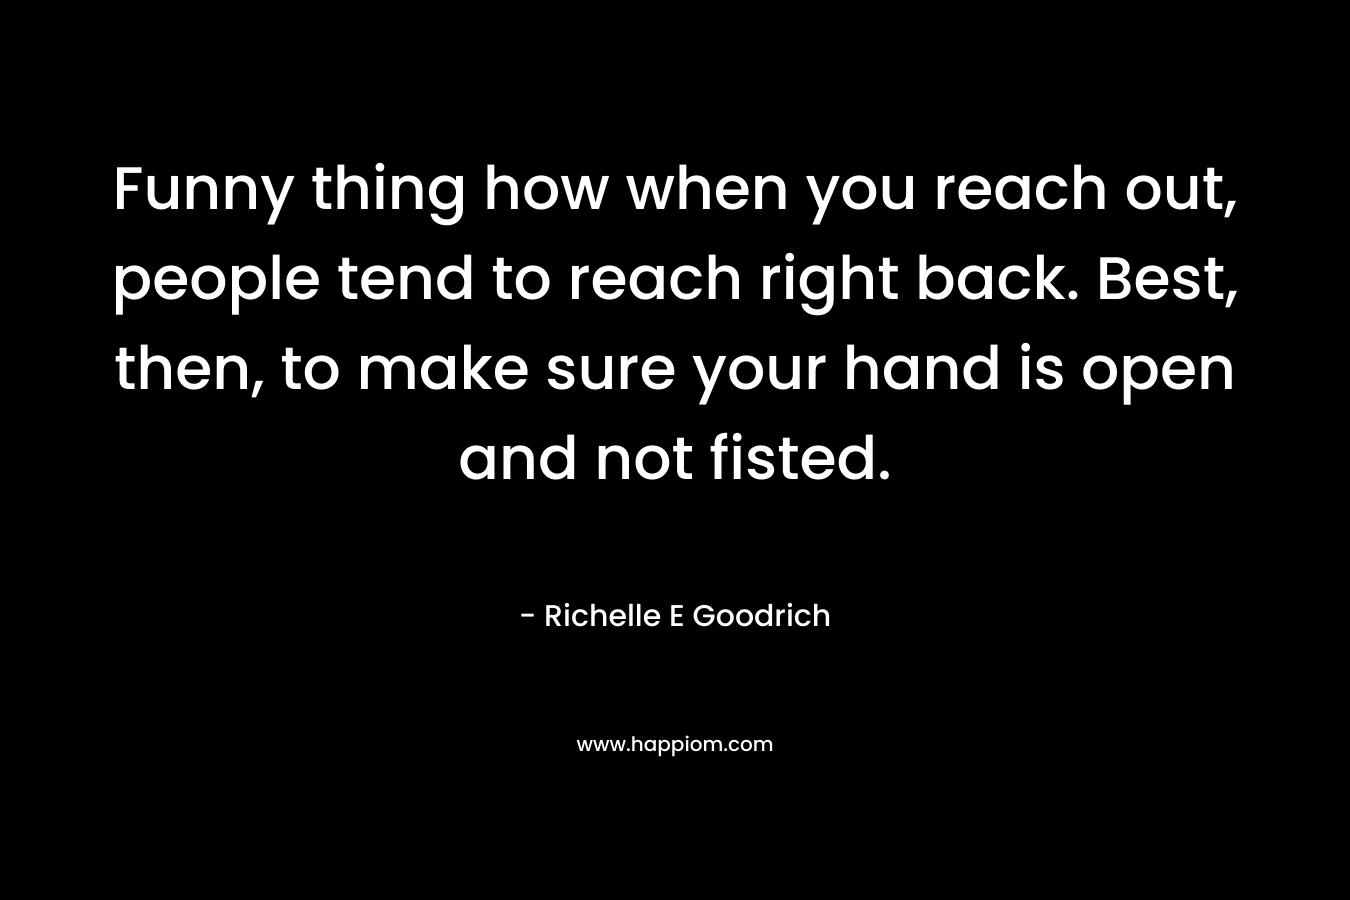 Funny thing how when you reach out, people tend to reach right back. Best, then, to make sure your hand is open and not fisted.